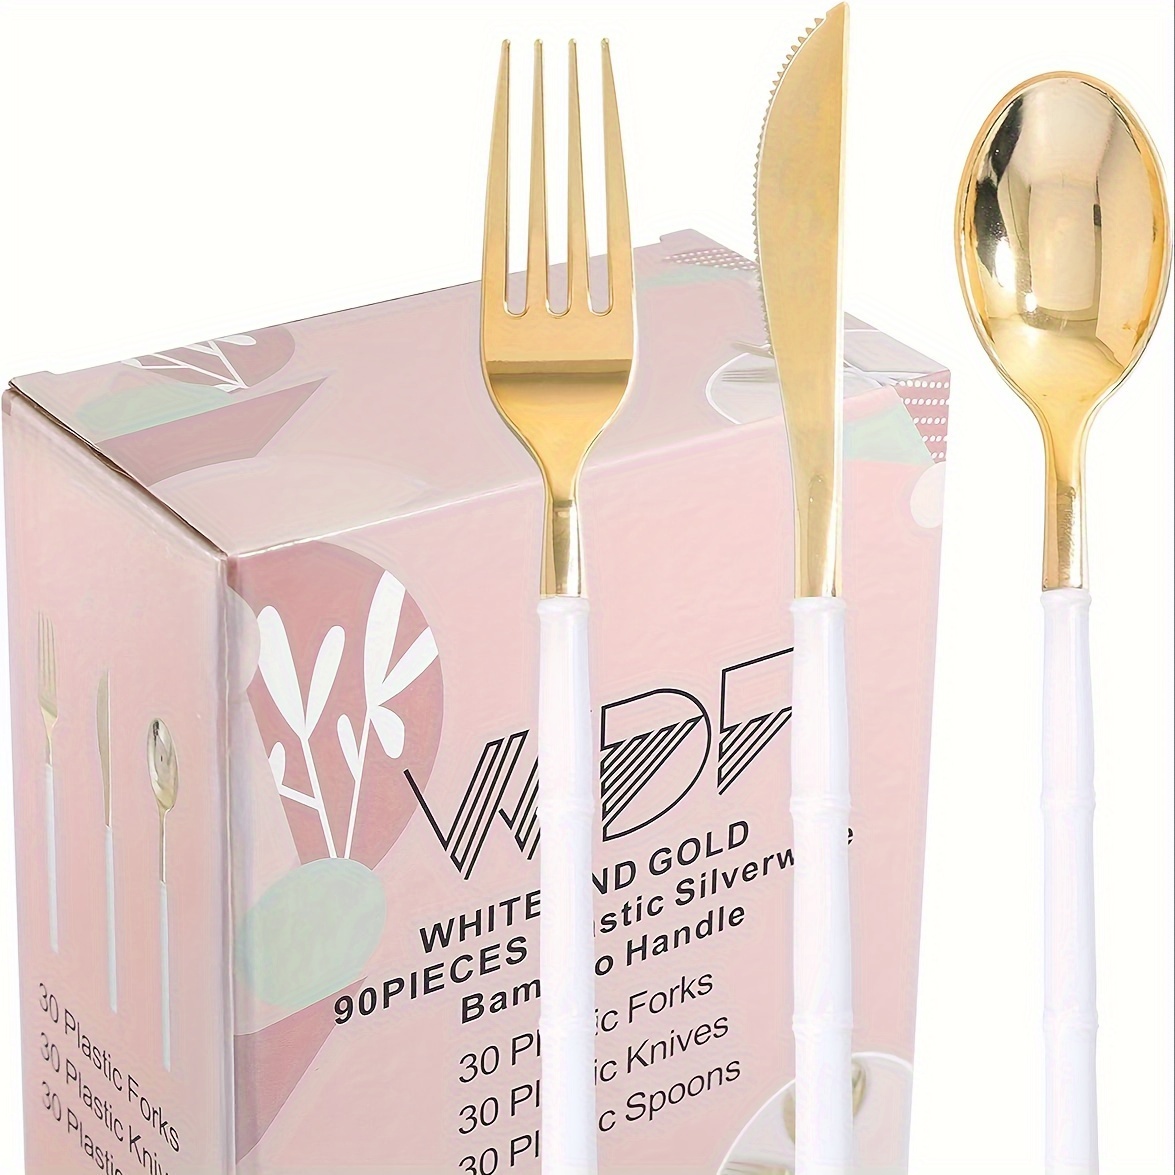 

90 Pieces Of Gold/pink/silver Heavy Plastic Cutlery For Weddings, Parties, Banquets, Christmas, Etc., Including 30 Forks, 30 Spoons, 30 Knives